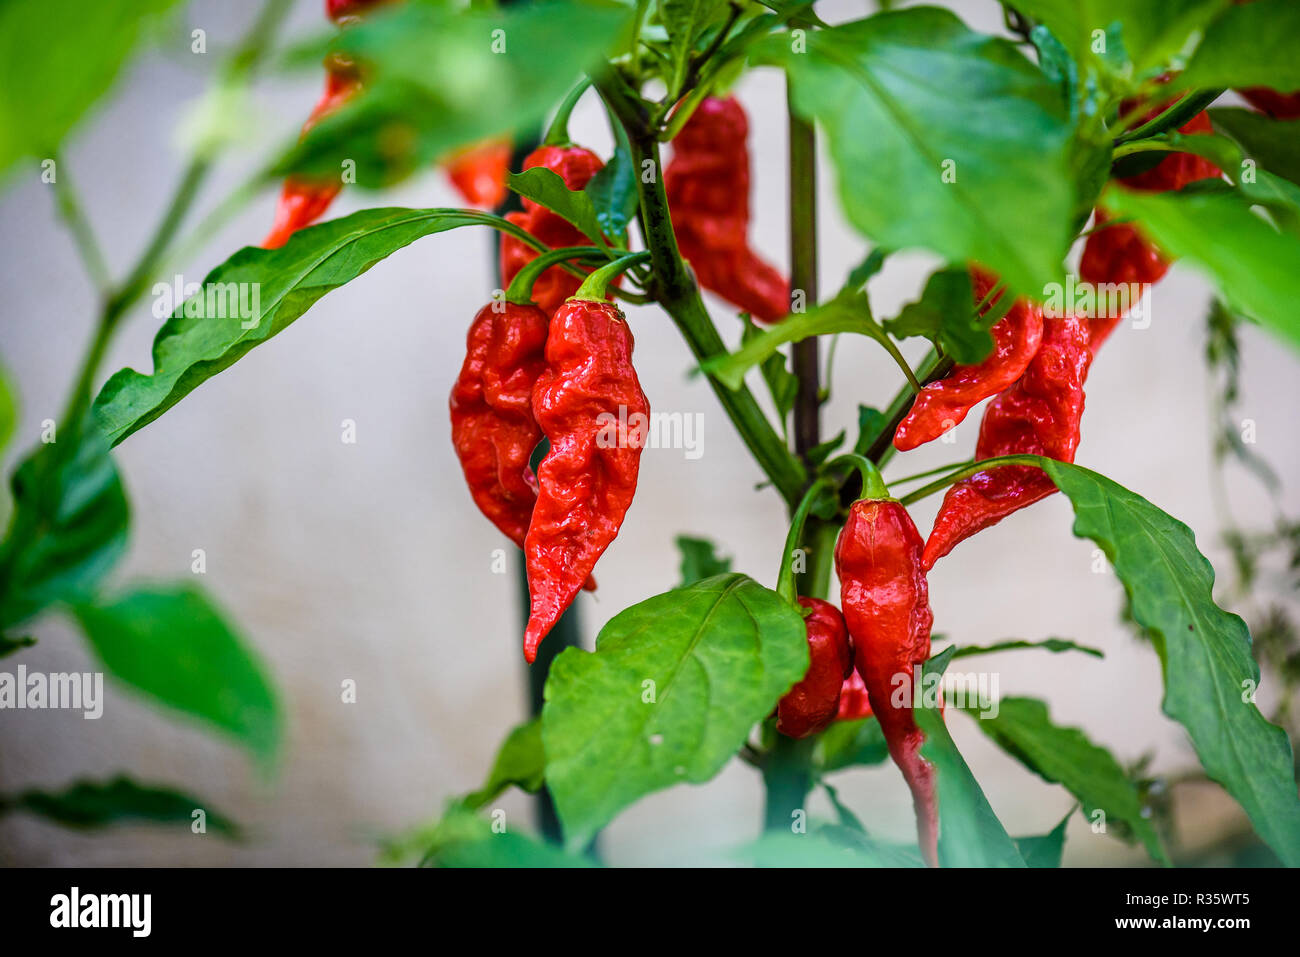 Red hot chilli ghost pepper Bhut Jolokia on a plant. Capsicum chinense peppers on a green plant with leaves in home garden or a farm. Stock Photo